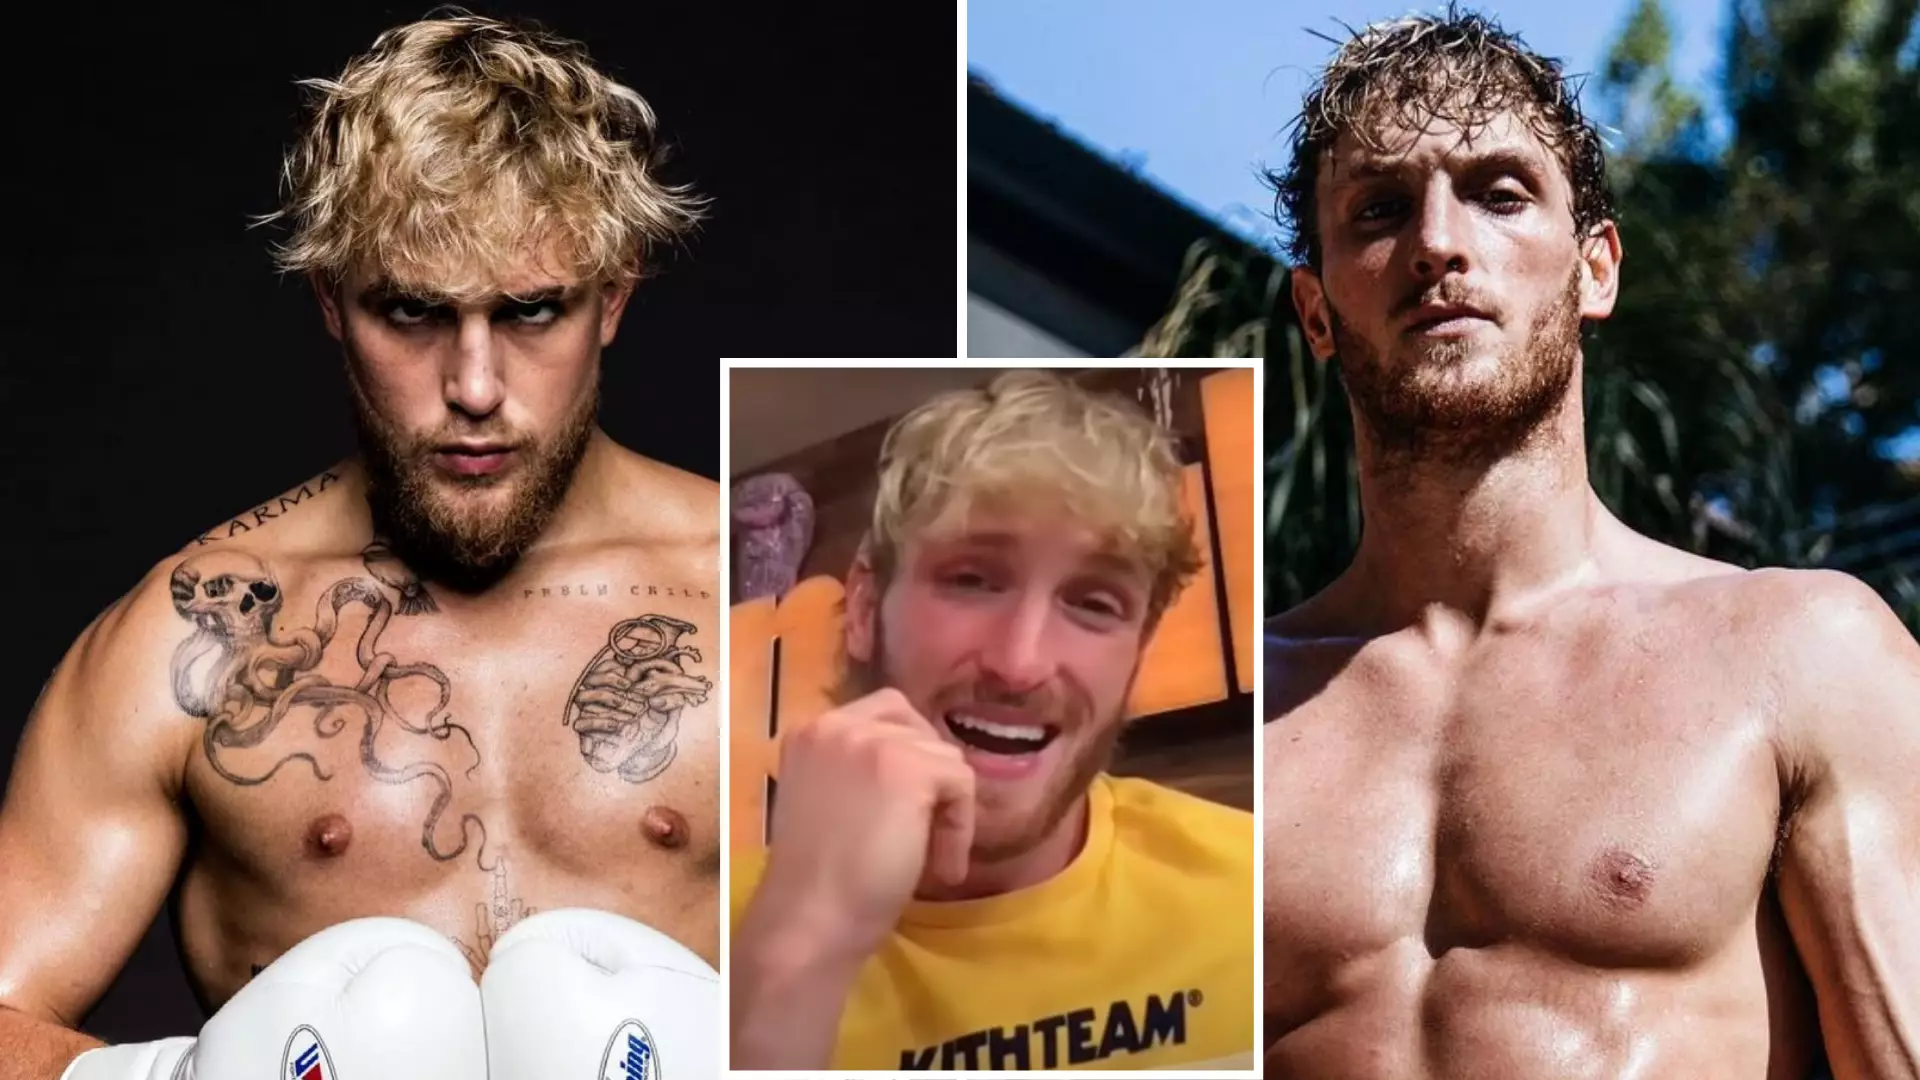 Logan Paul Claims He Could Fight Brother Jake Paul In 'One Of The Highest-Grossing PPVs In History'